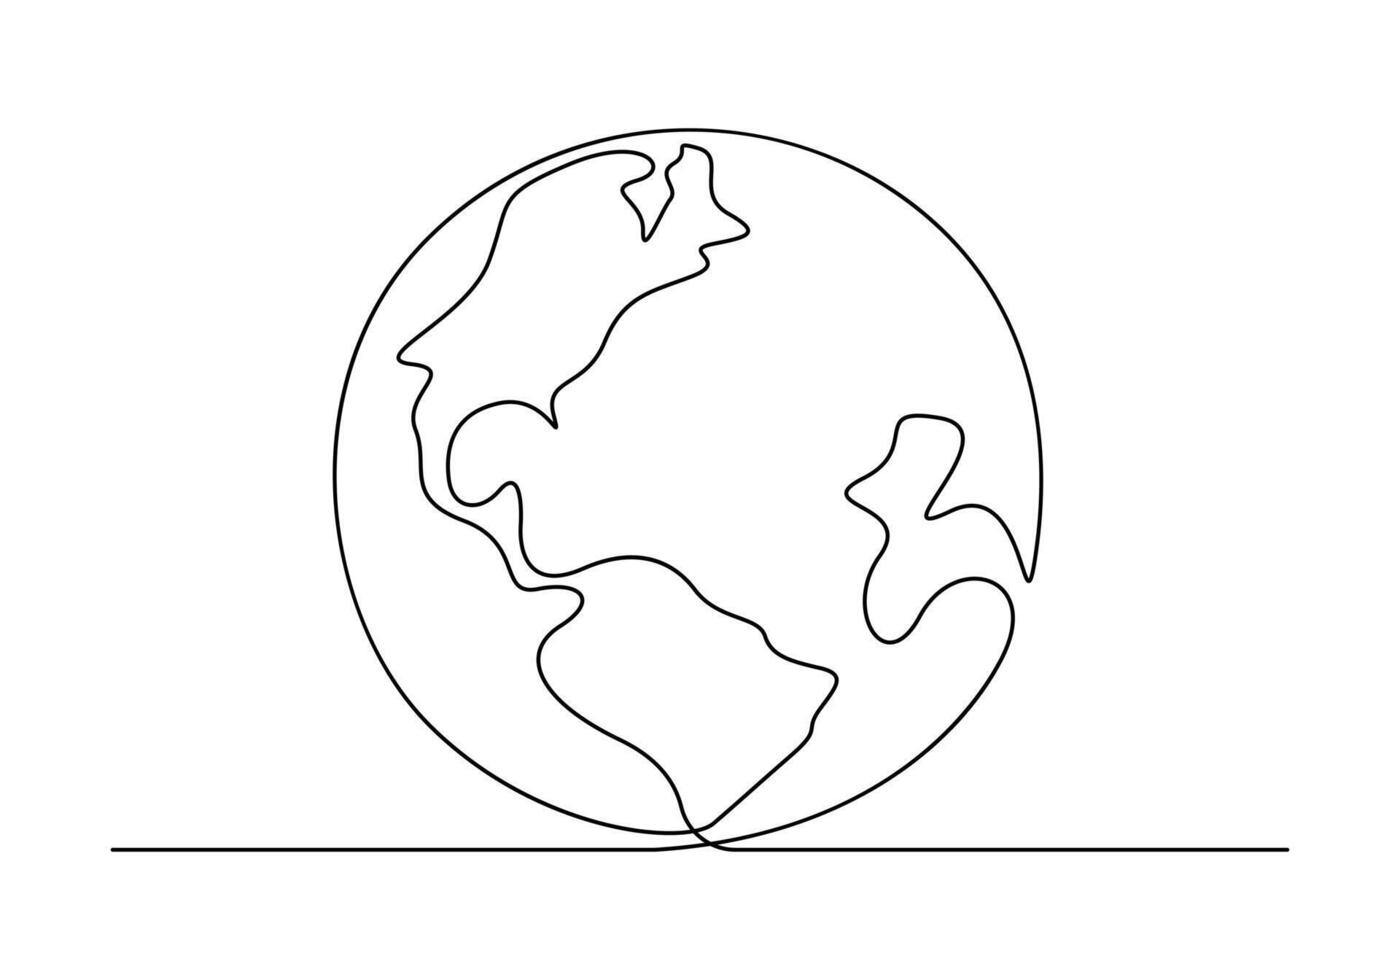 Earth globe continuous one line drawing vector illustration. Pro vector